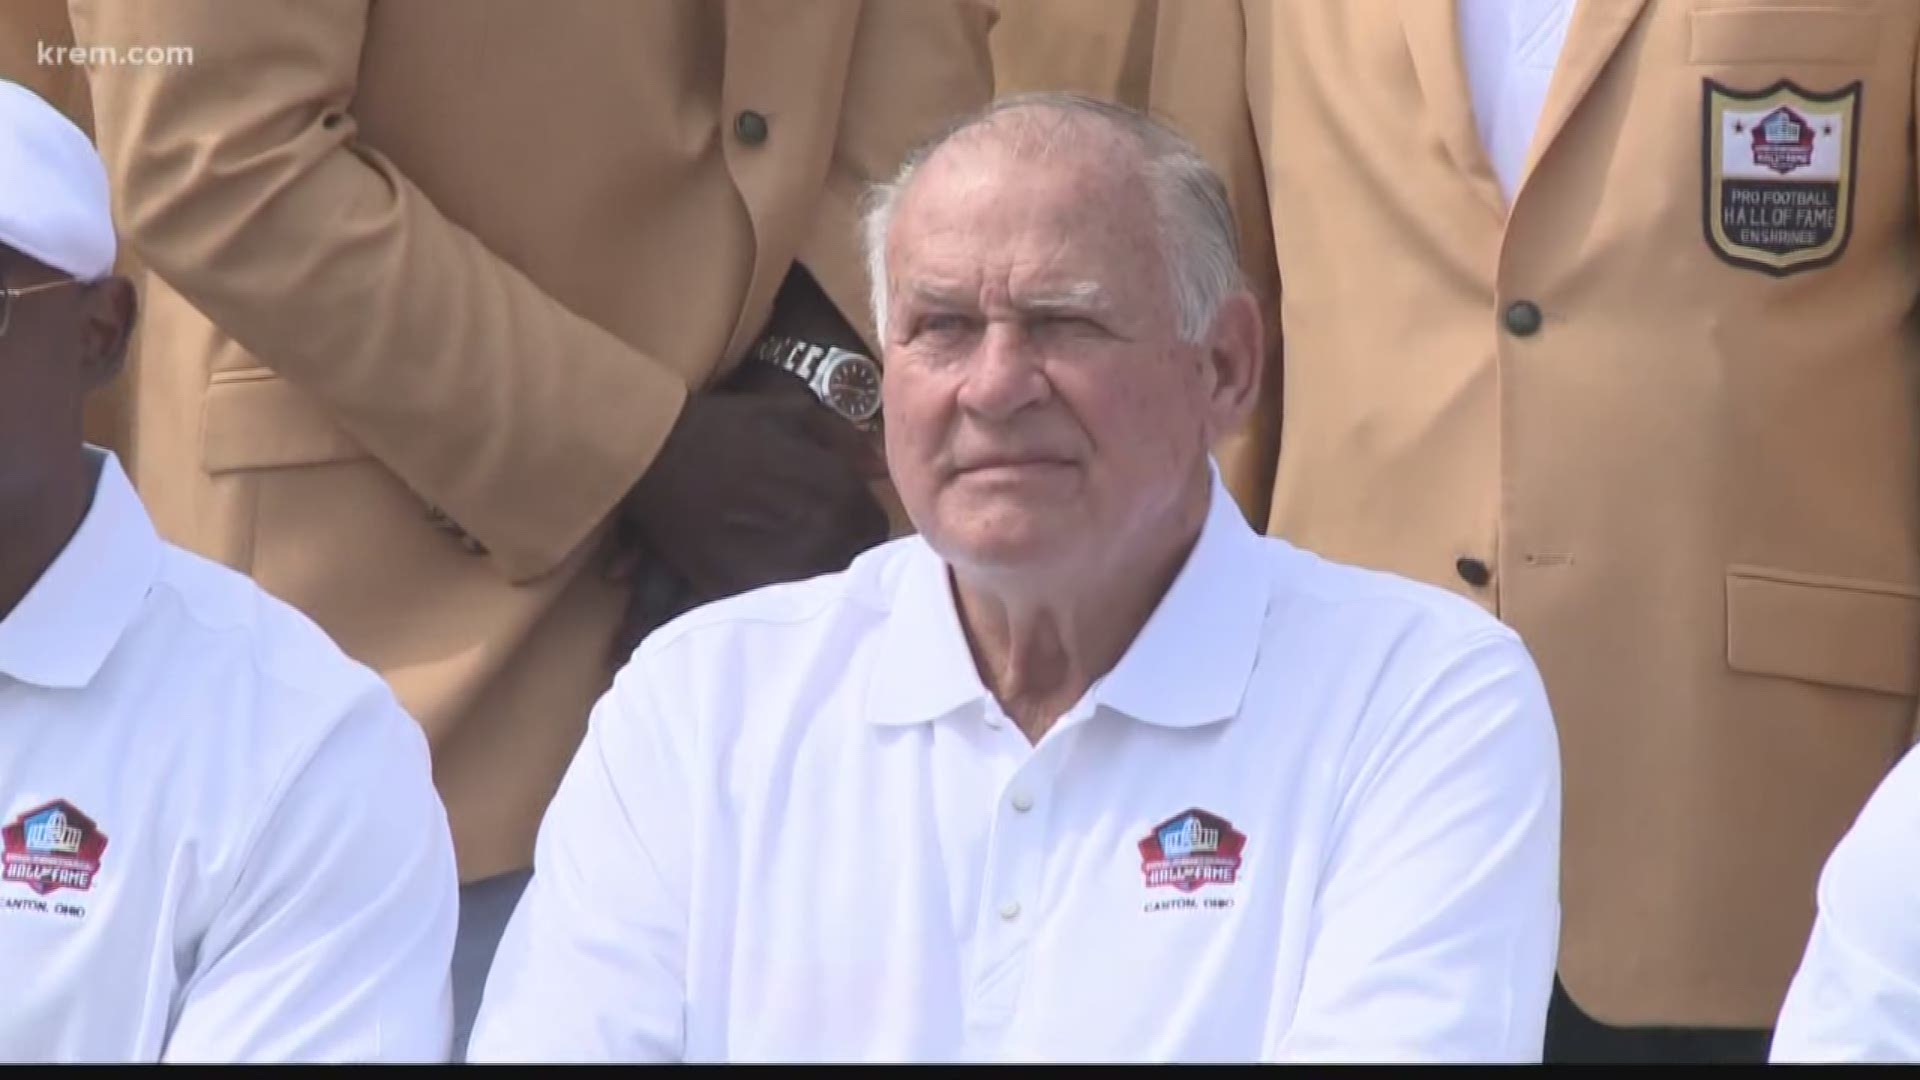 Jerry Kramer played for the University of Idaho Vandals and the Green Bay Packers.